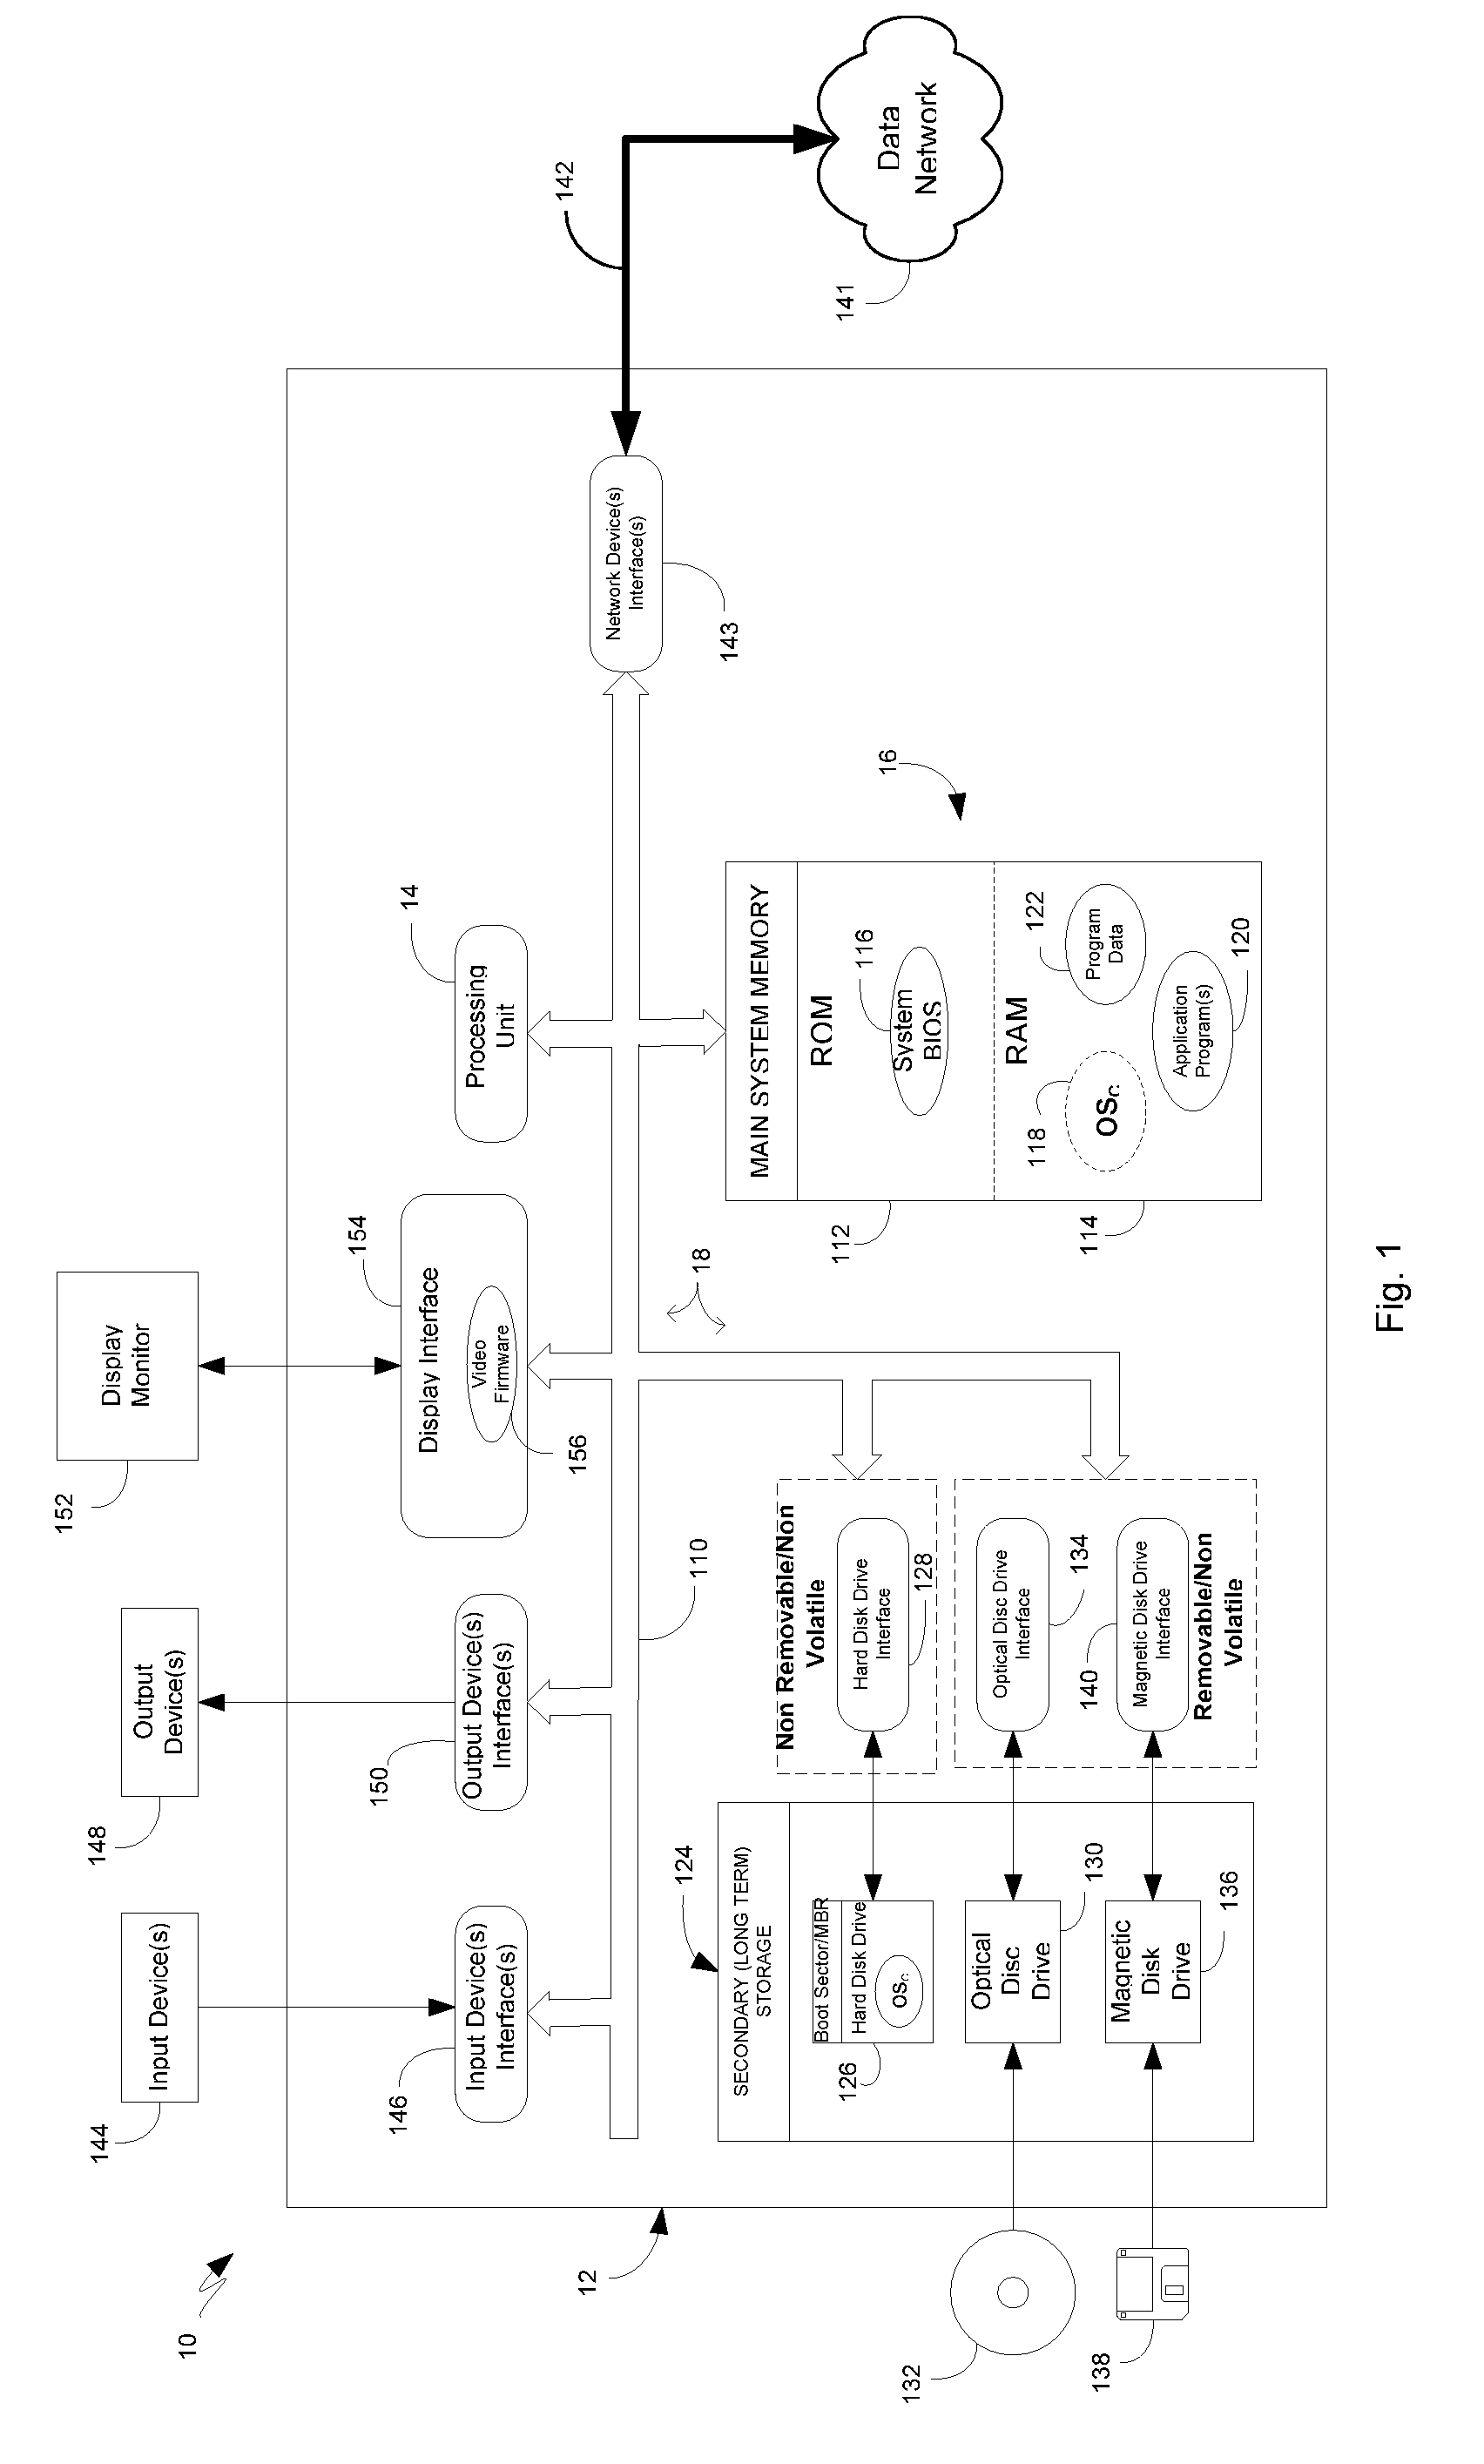 Methods, systems and computer-readable media for compressing data